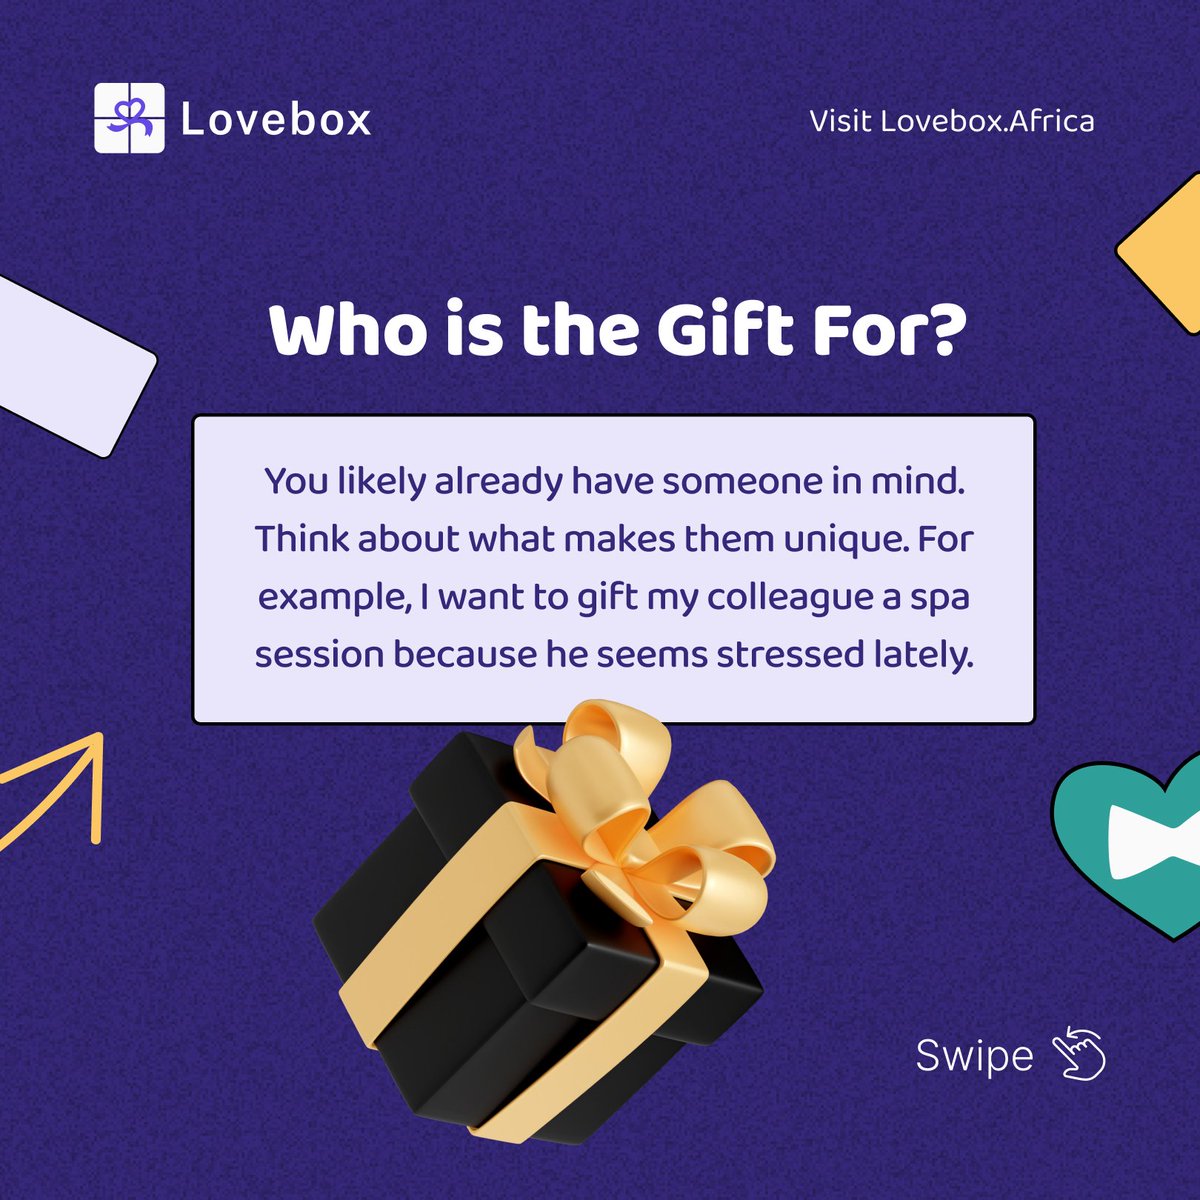 🤔 Who is the gift for? Consider their uniqueness. For example, a spa session for a stressed colleague. #ThoughtfulGifts #GiftGiving